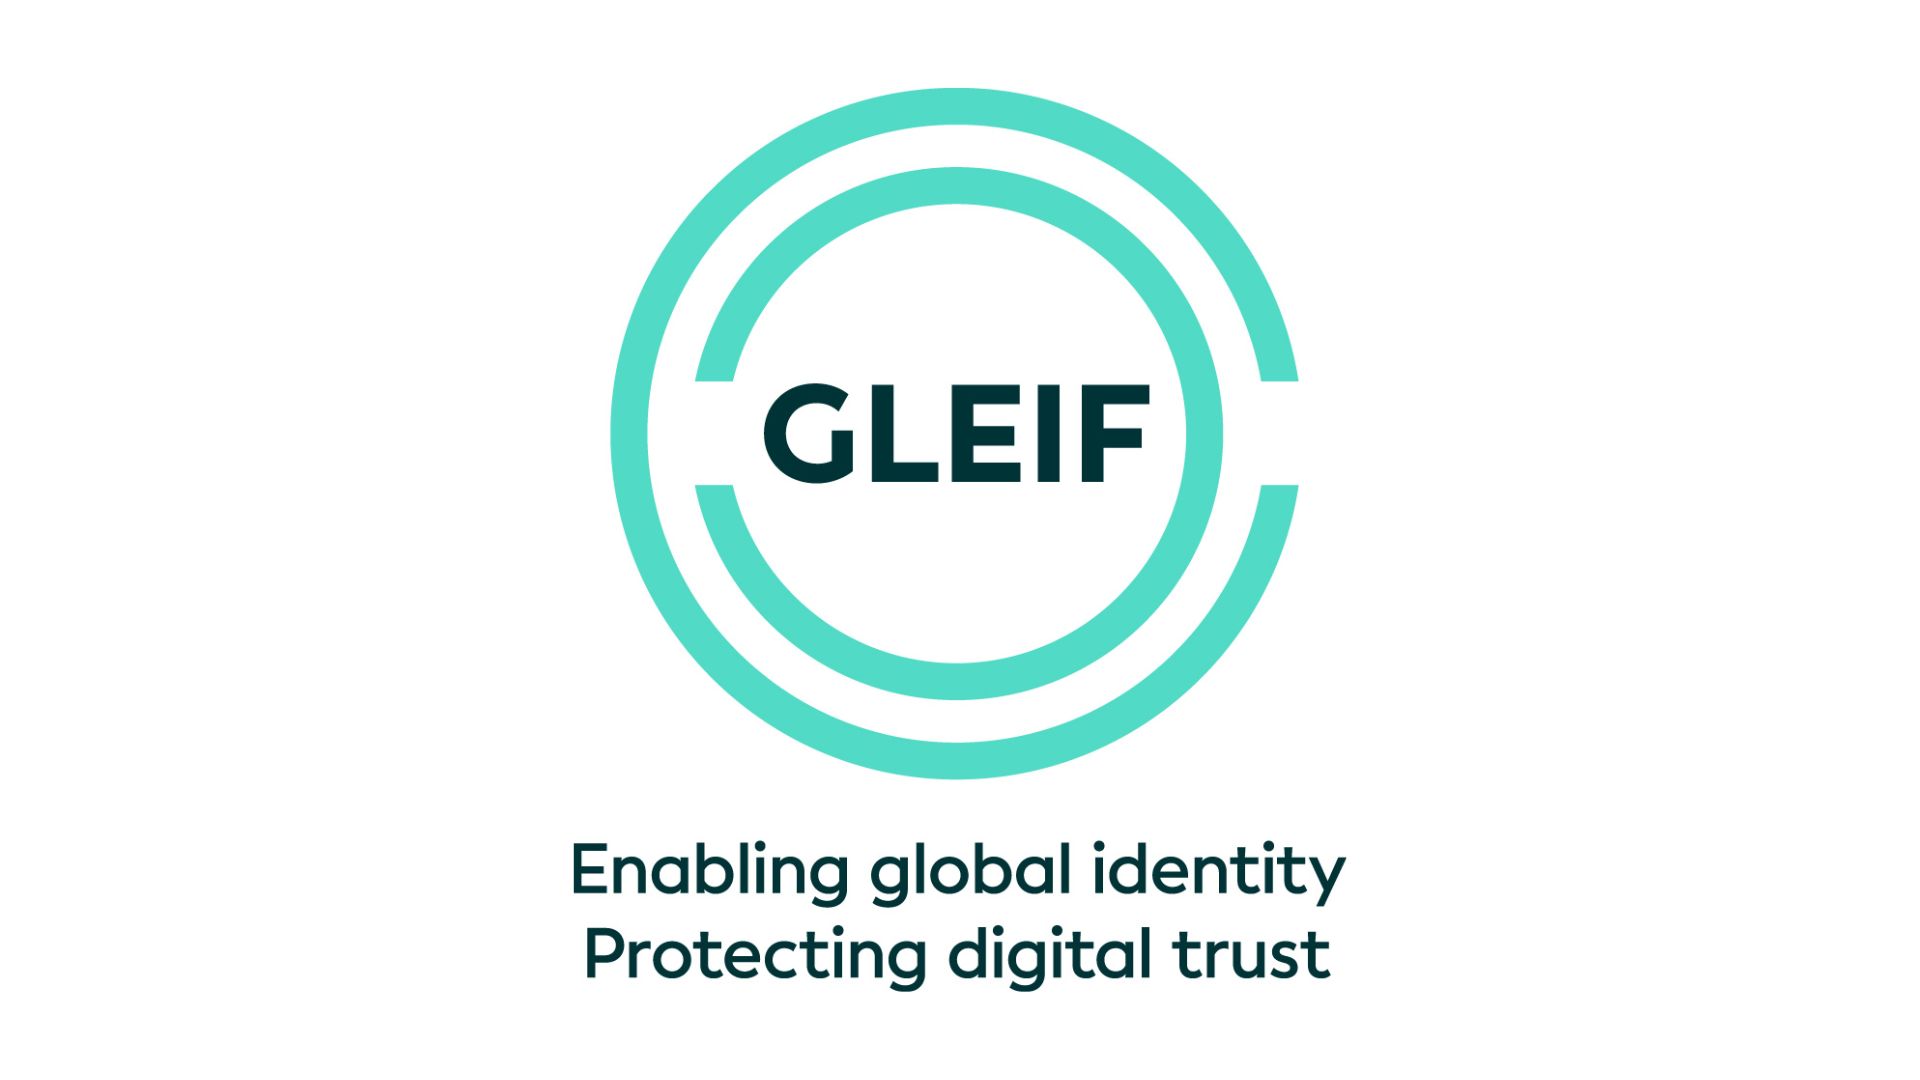 OS-Climate Welcomes GLEIF as an Associate Member & publishes related Whitepaper on Entity Matching